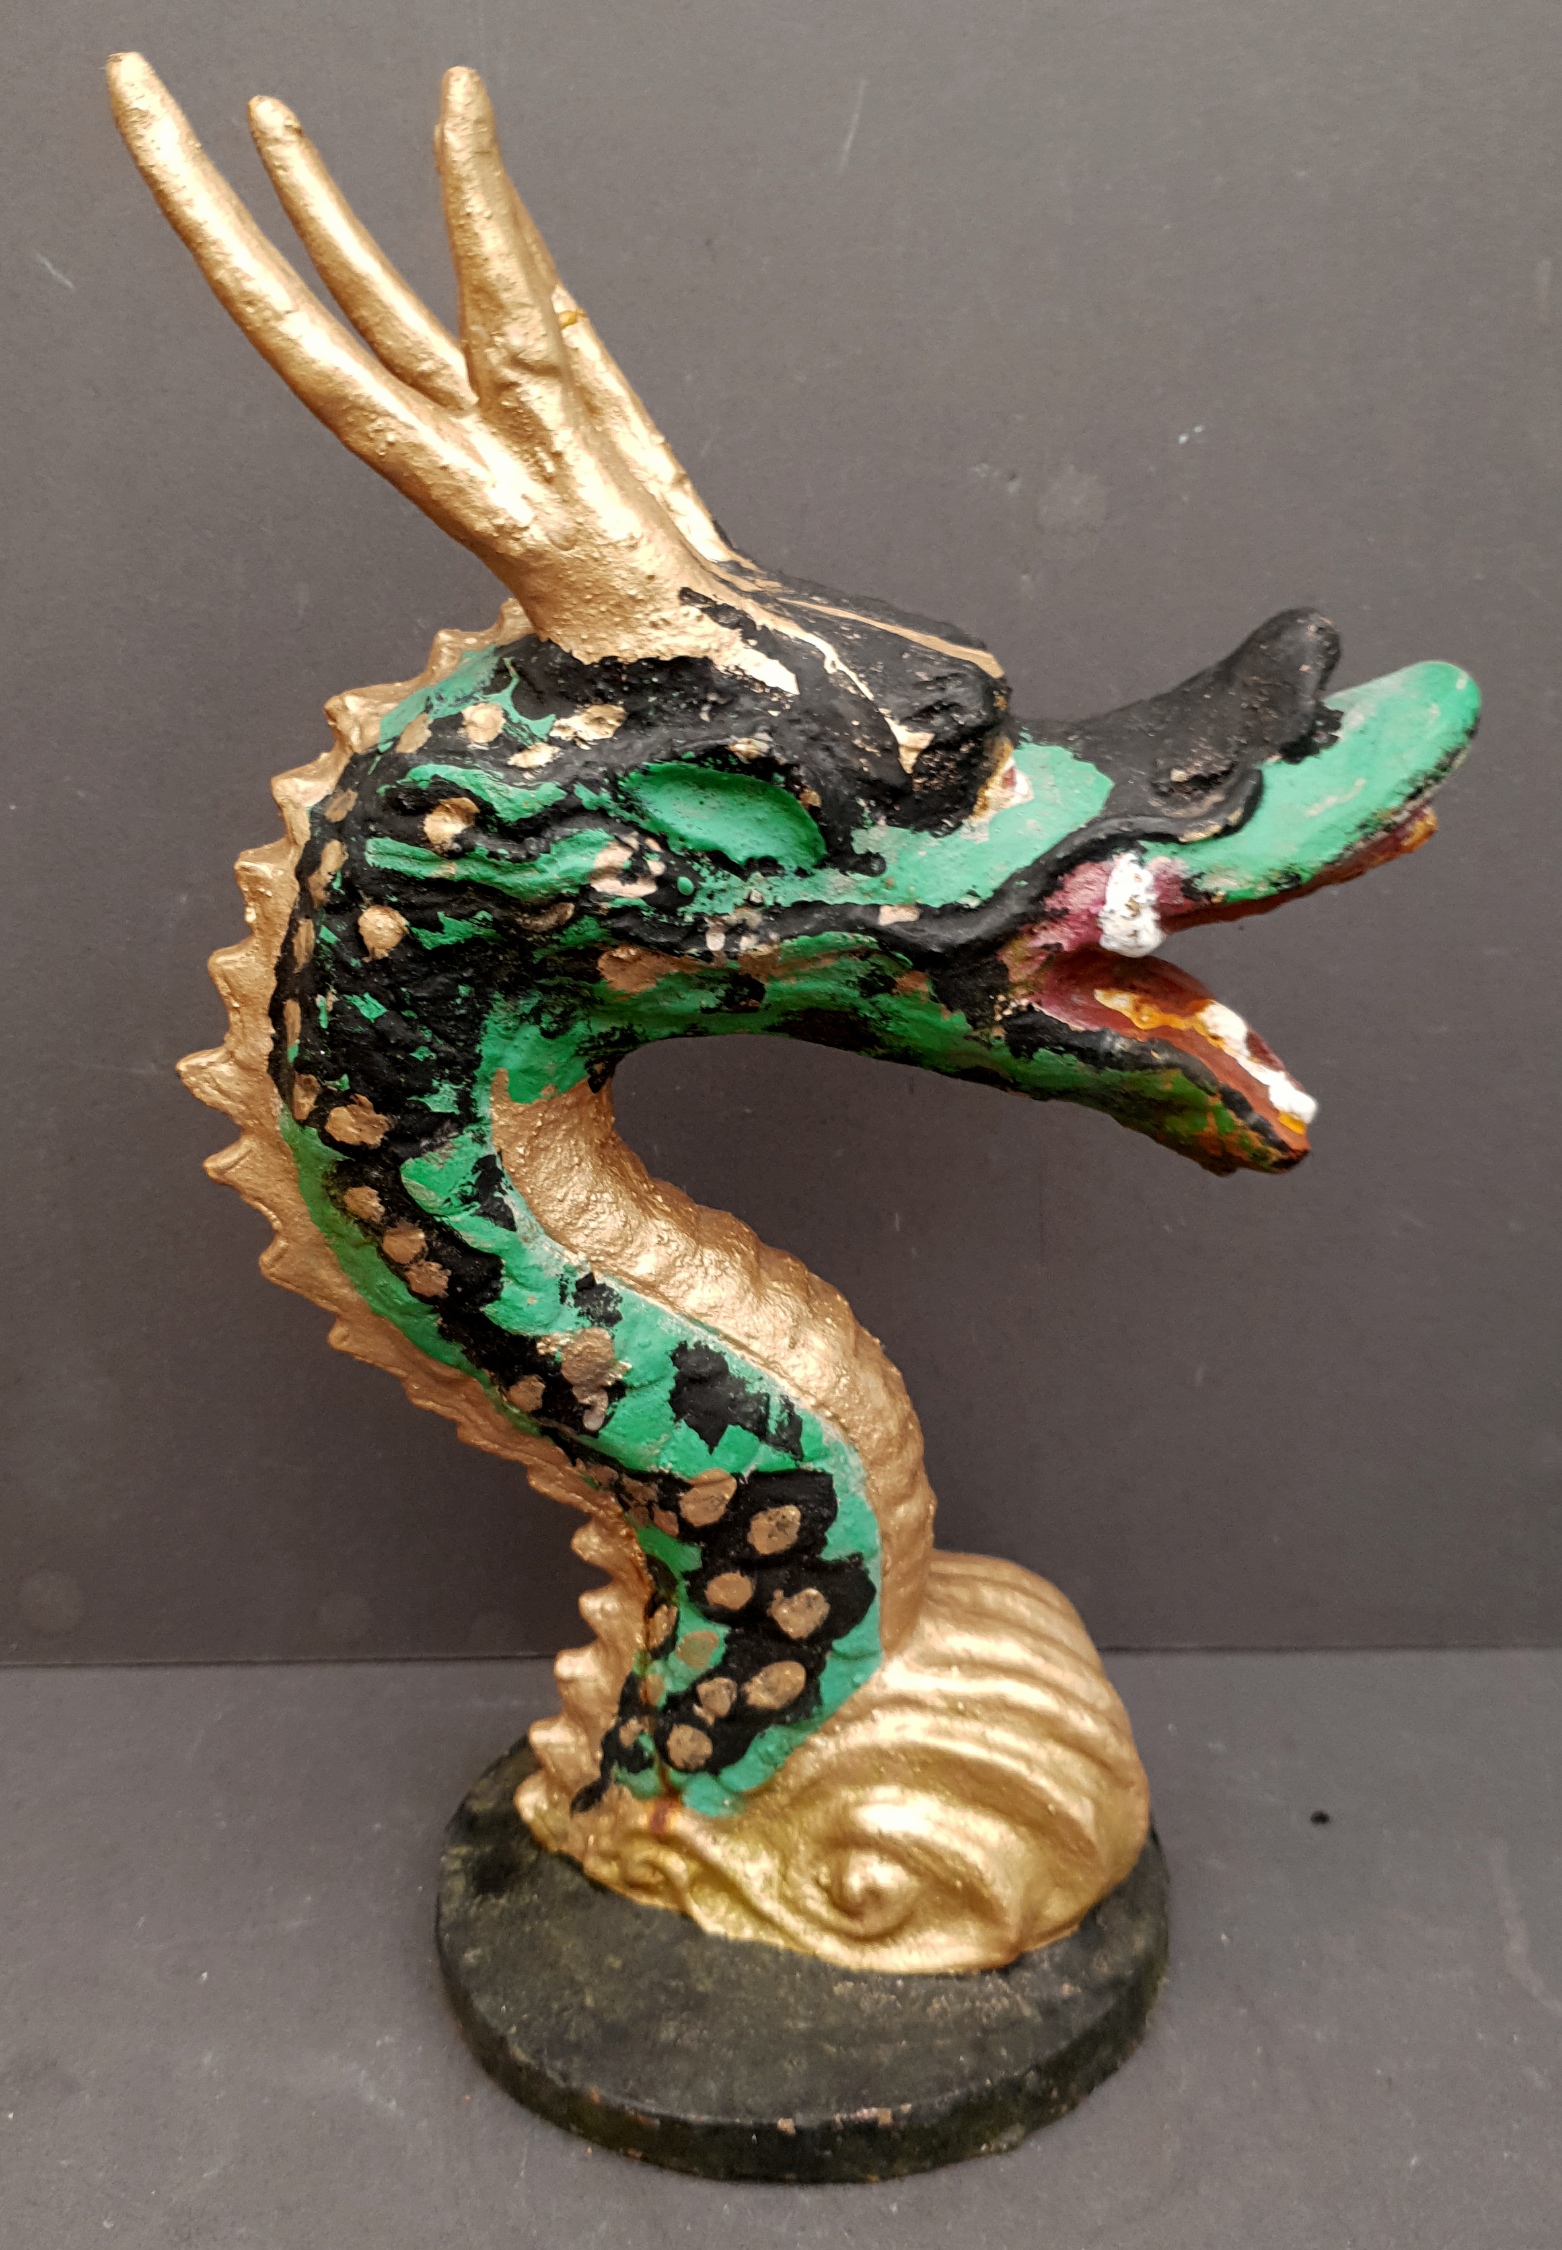 Antique Cast Iron Dragon or Serpent Head Possibly Fair Ground - Image 2 of 2